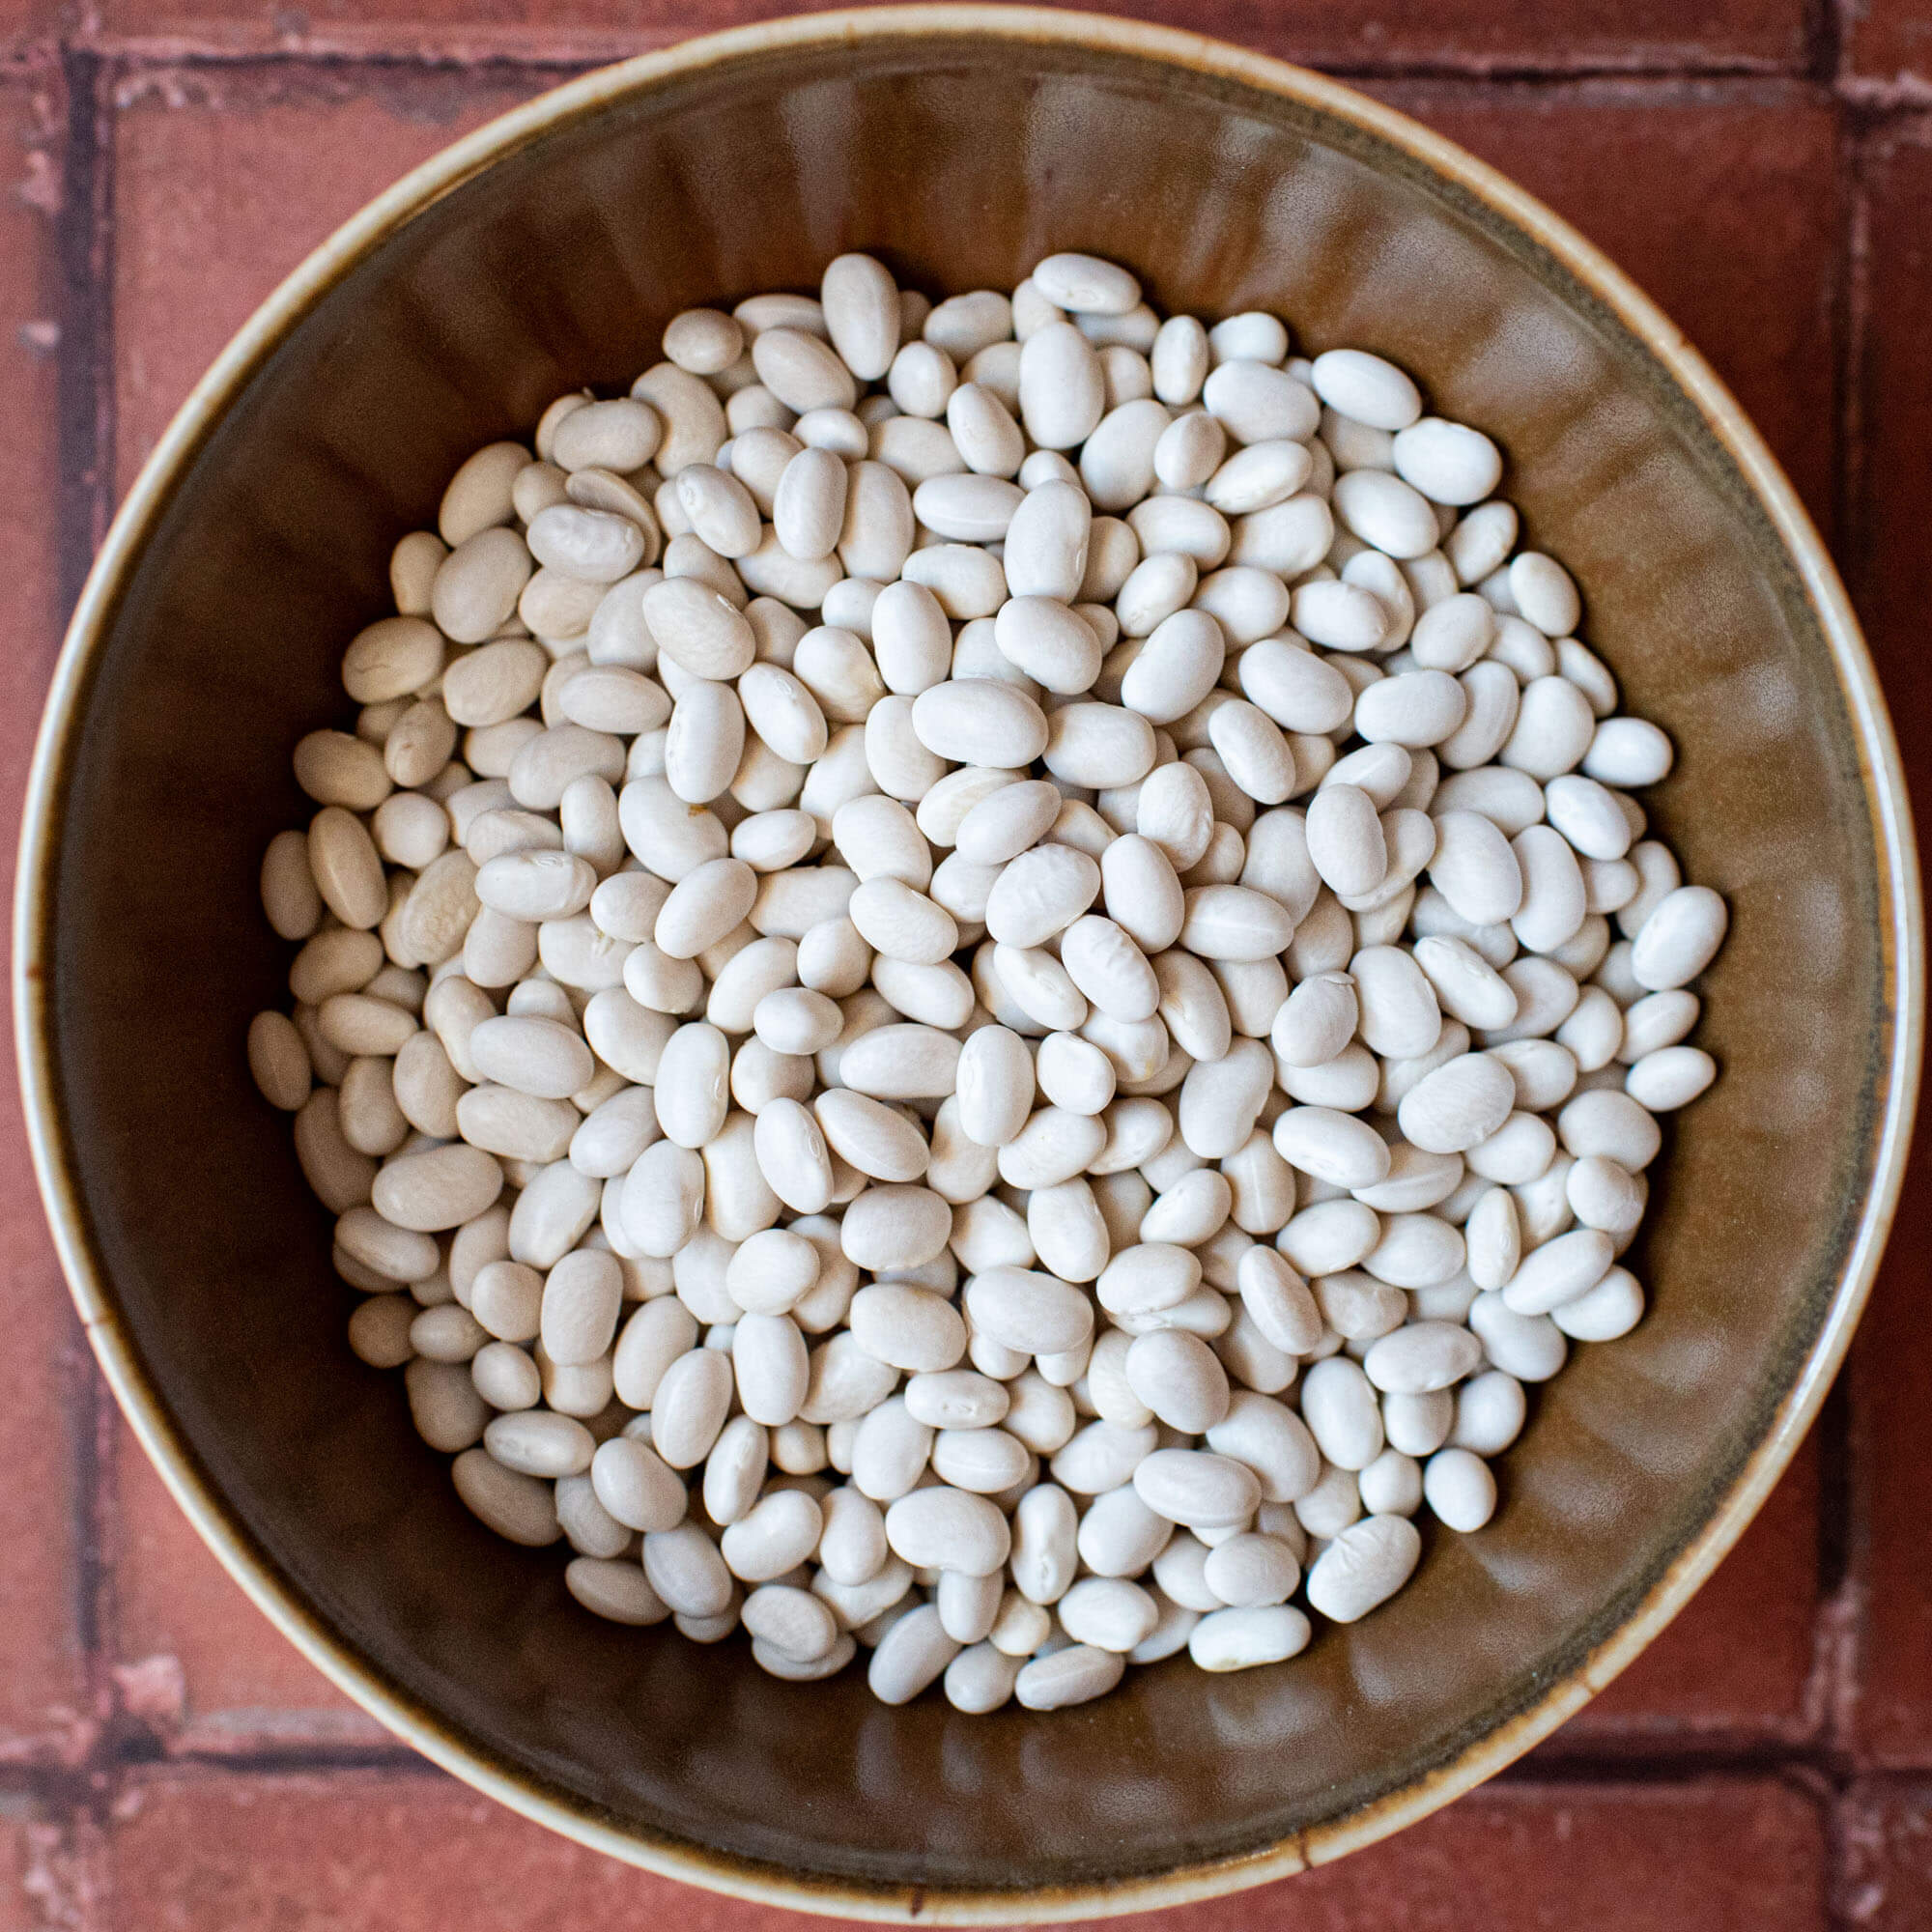 Primary Beans Organic Alubia beans dried